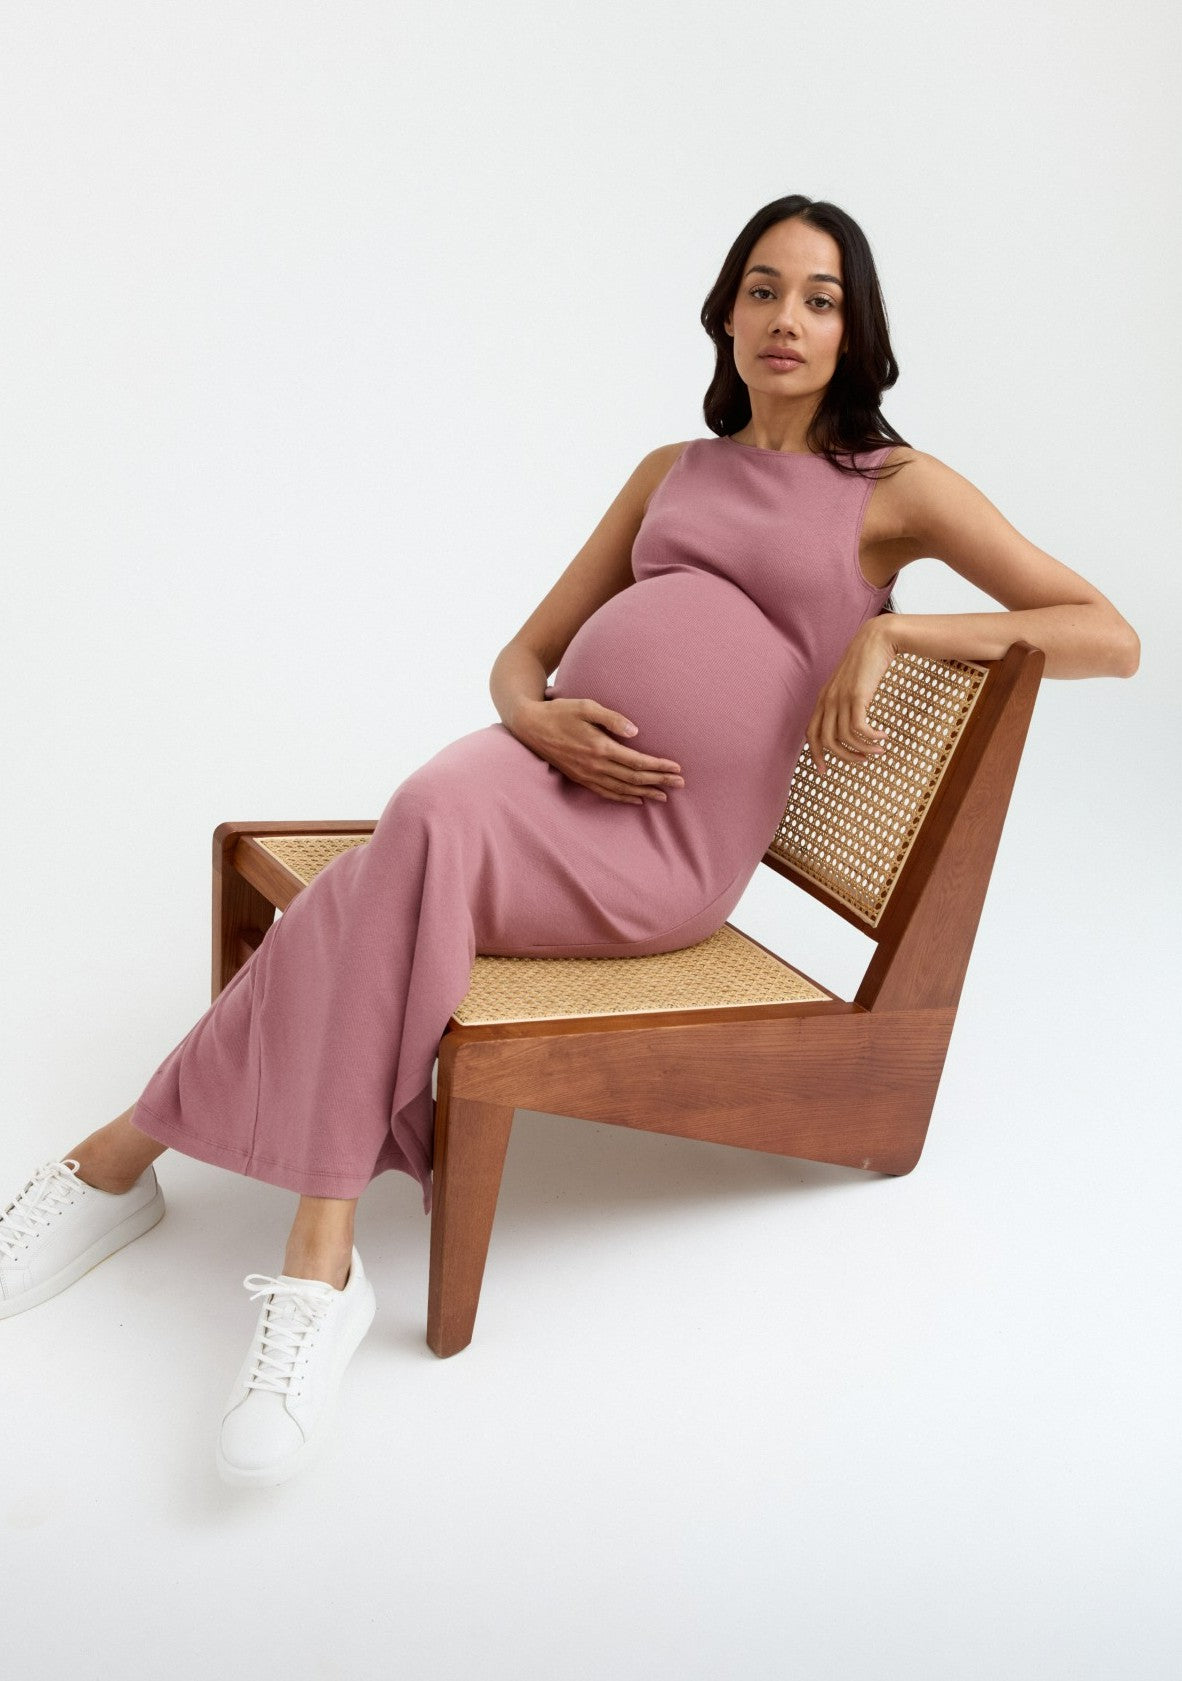 Carry Maternity  Best Maternity Clothes Canada – Carry Maternity